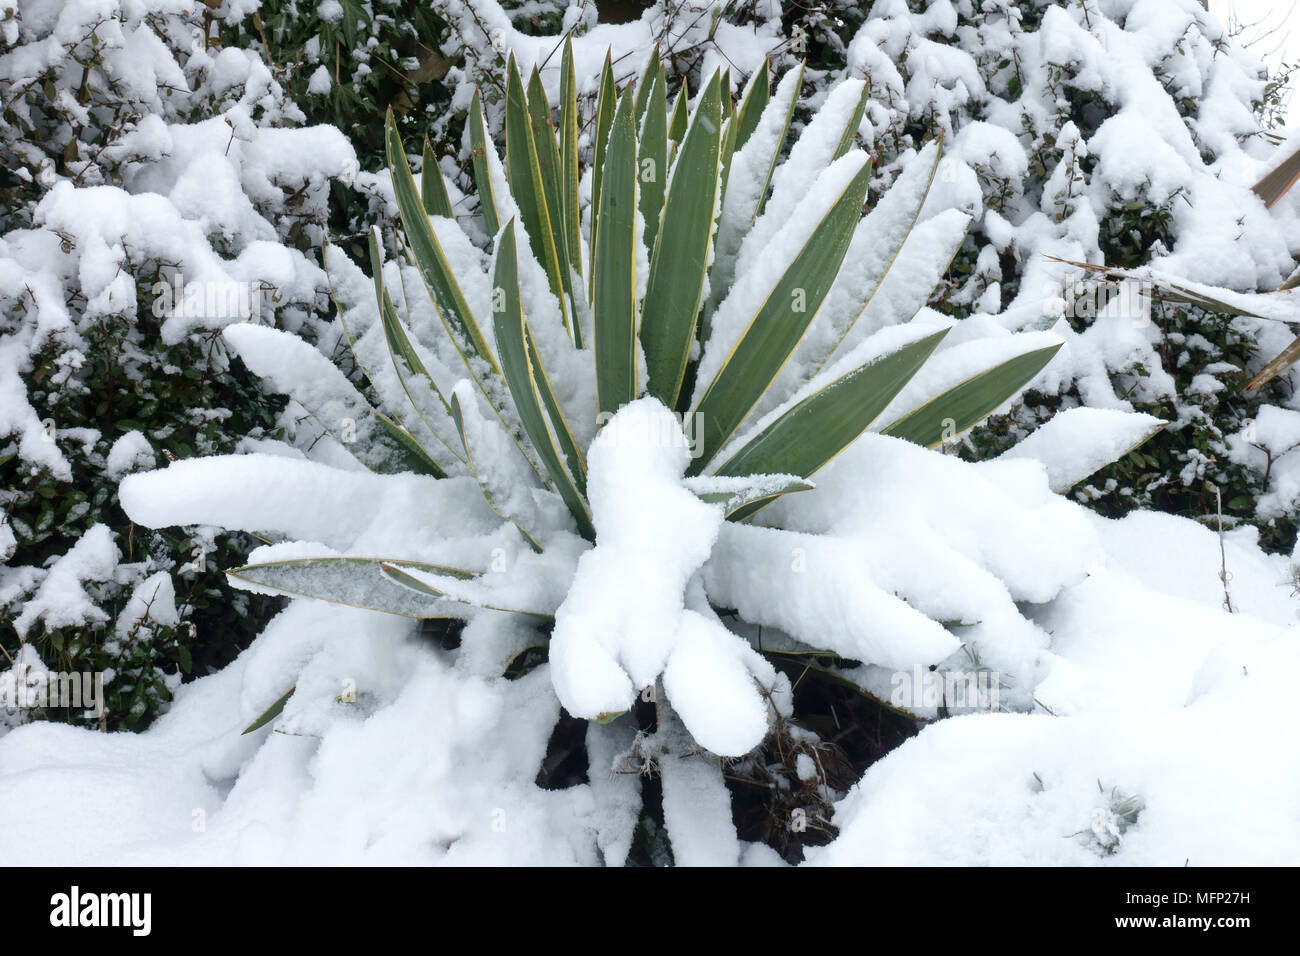 Fresh snow covering on the leaves of a yucca plant, Yucca gloriosa, on a cold grey winter day in March Stock Photo